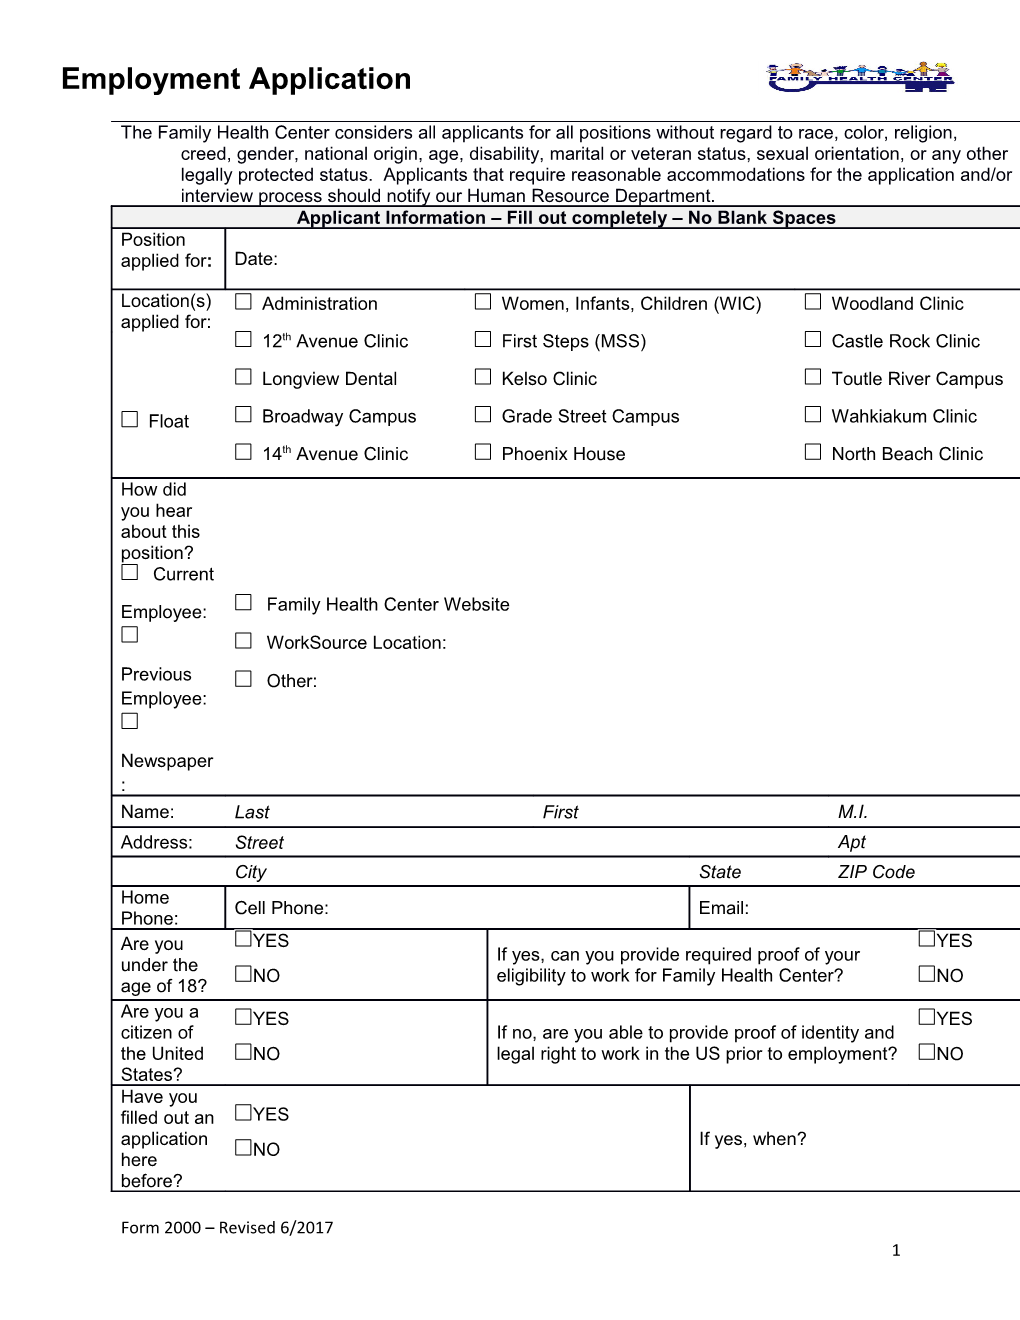 Applicant Information Fill out Completely No Blank Spaces